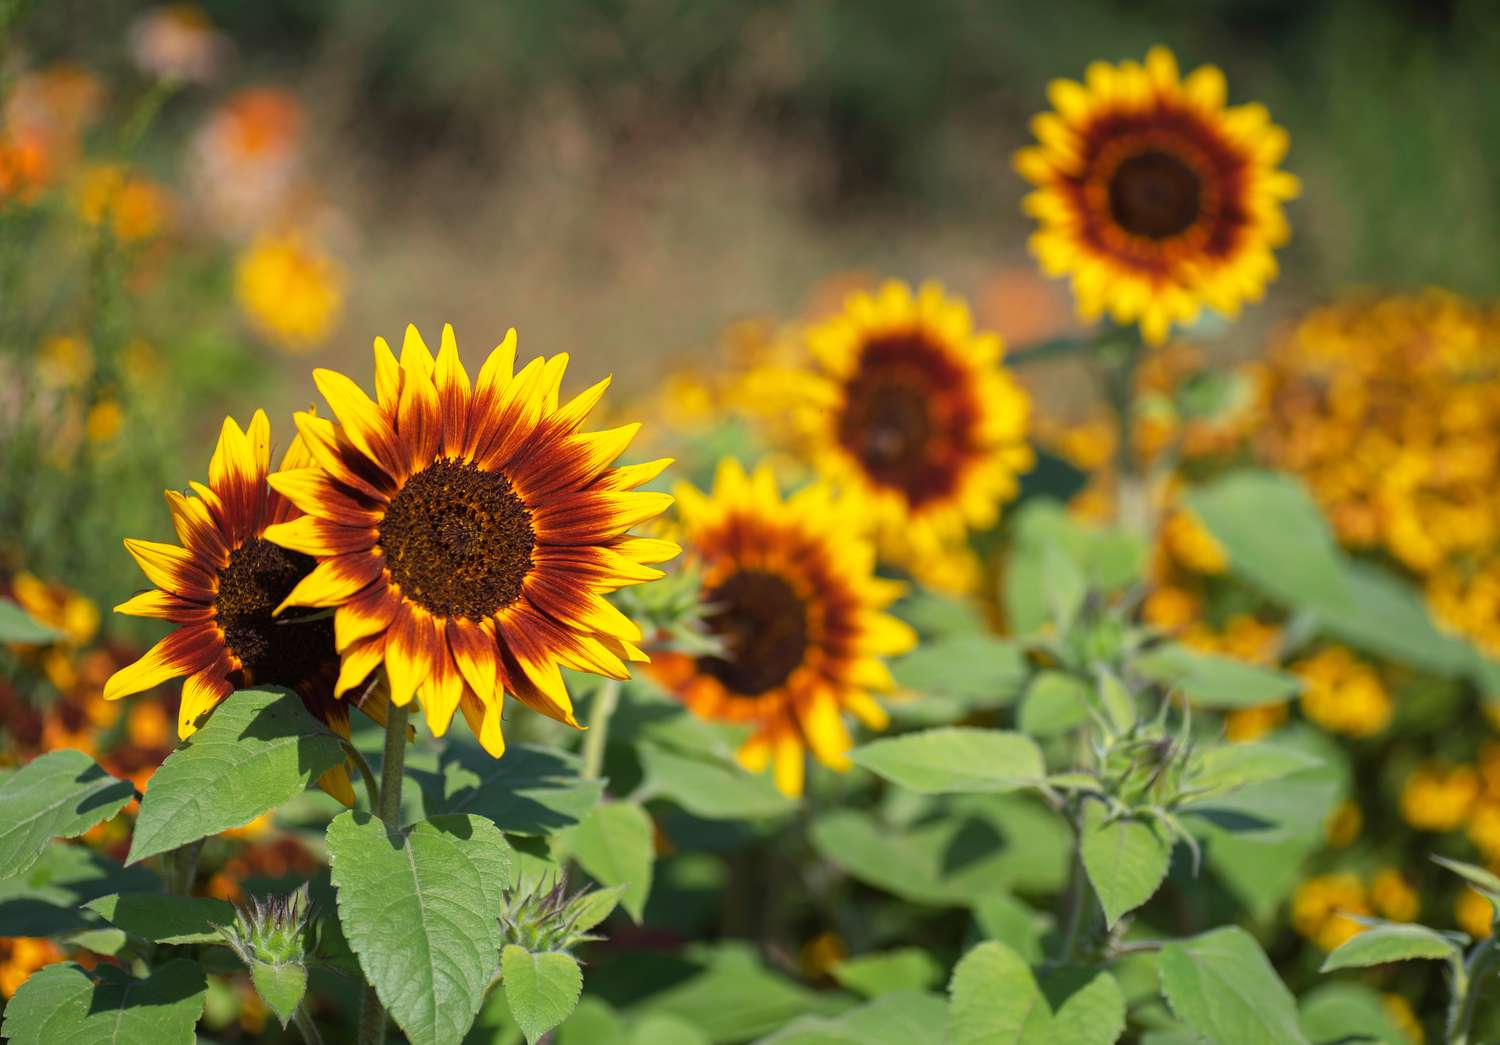 How Many Different Varieties Of Sunflowers Are There